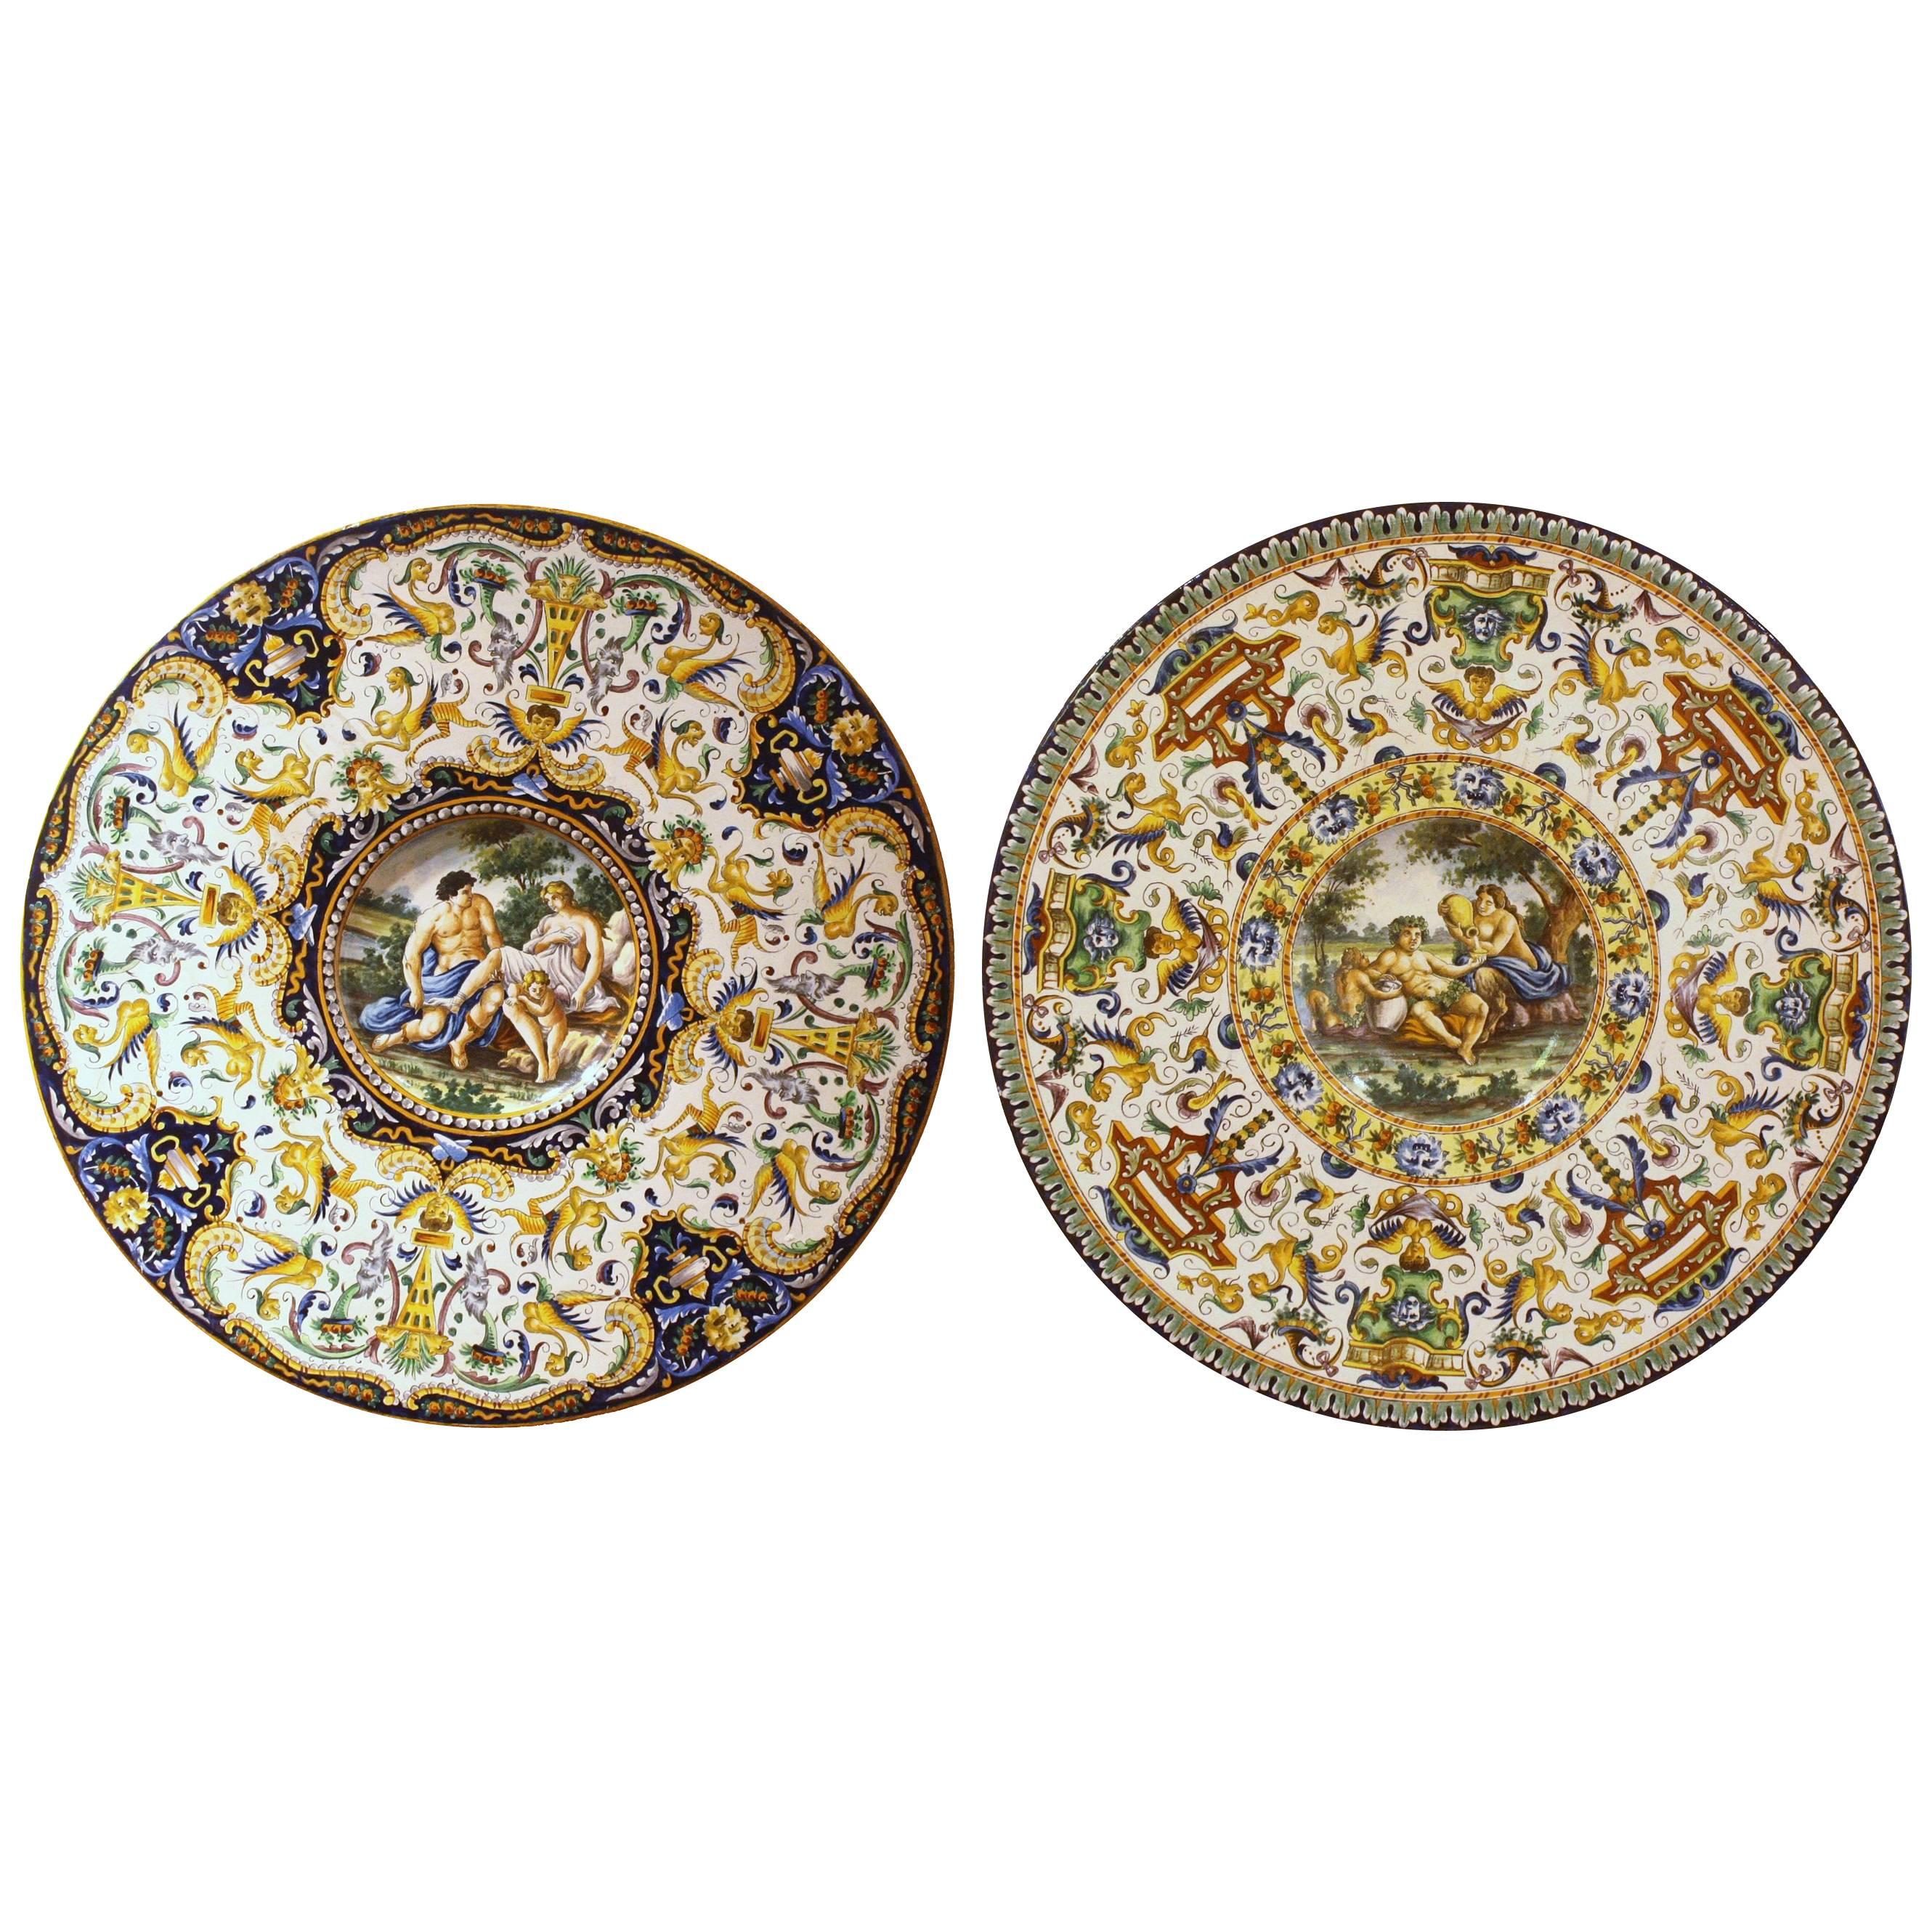 Large Italian Renaissance-Style Majolica Chargers